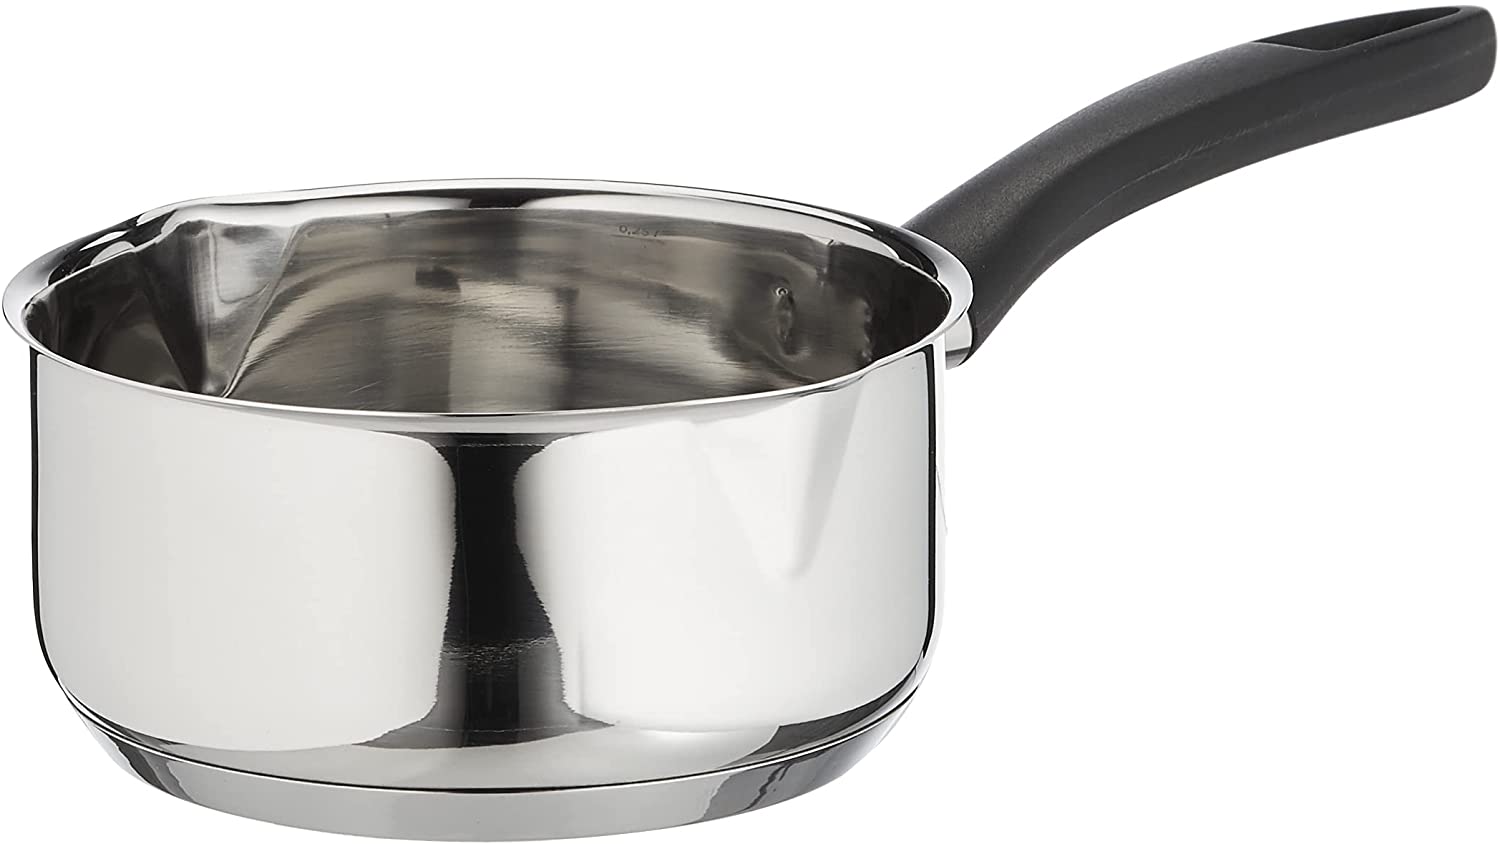 Tescoma Presto Saucepan 12 cm/ 0.5 Litre with Both-sided Spout